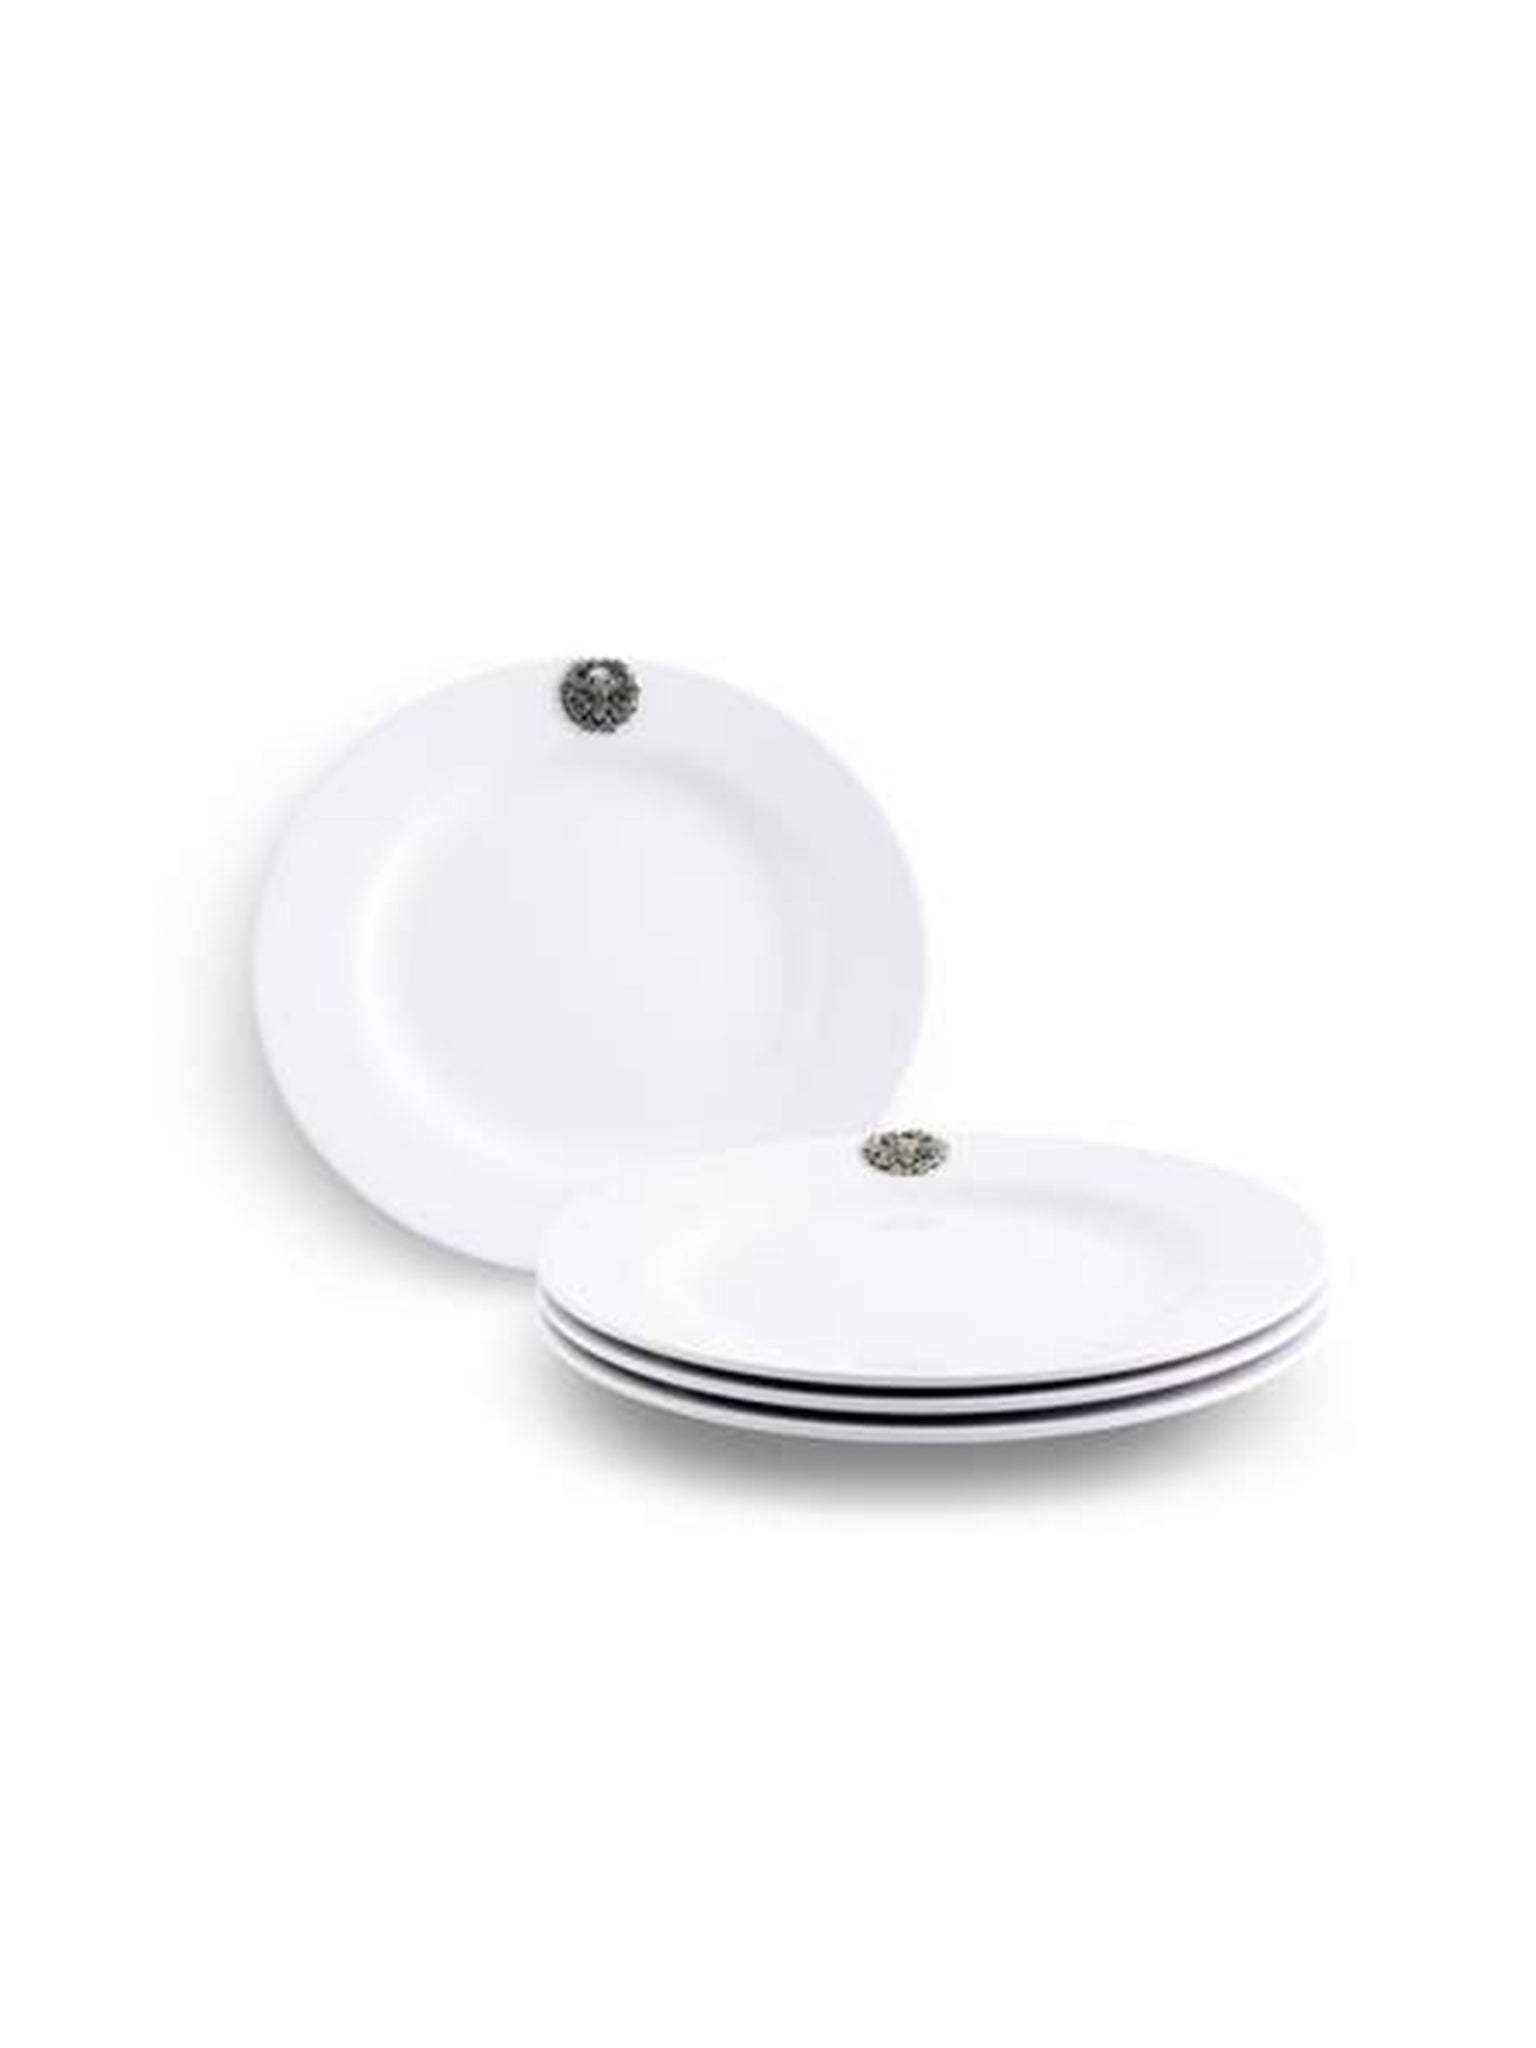 Bee Melamine Lunch Plates Weston Table